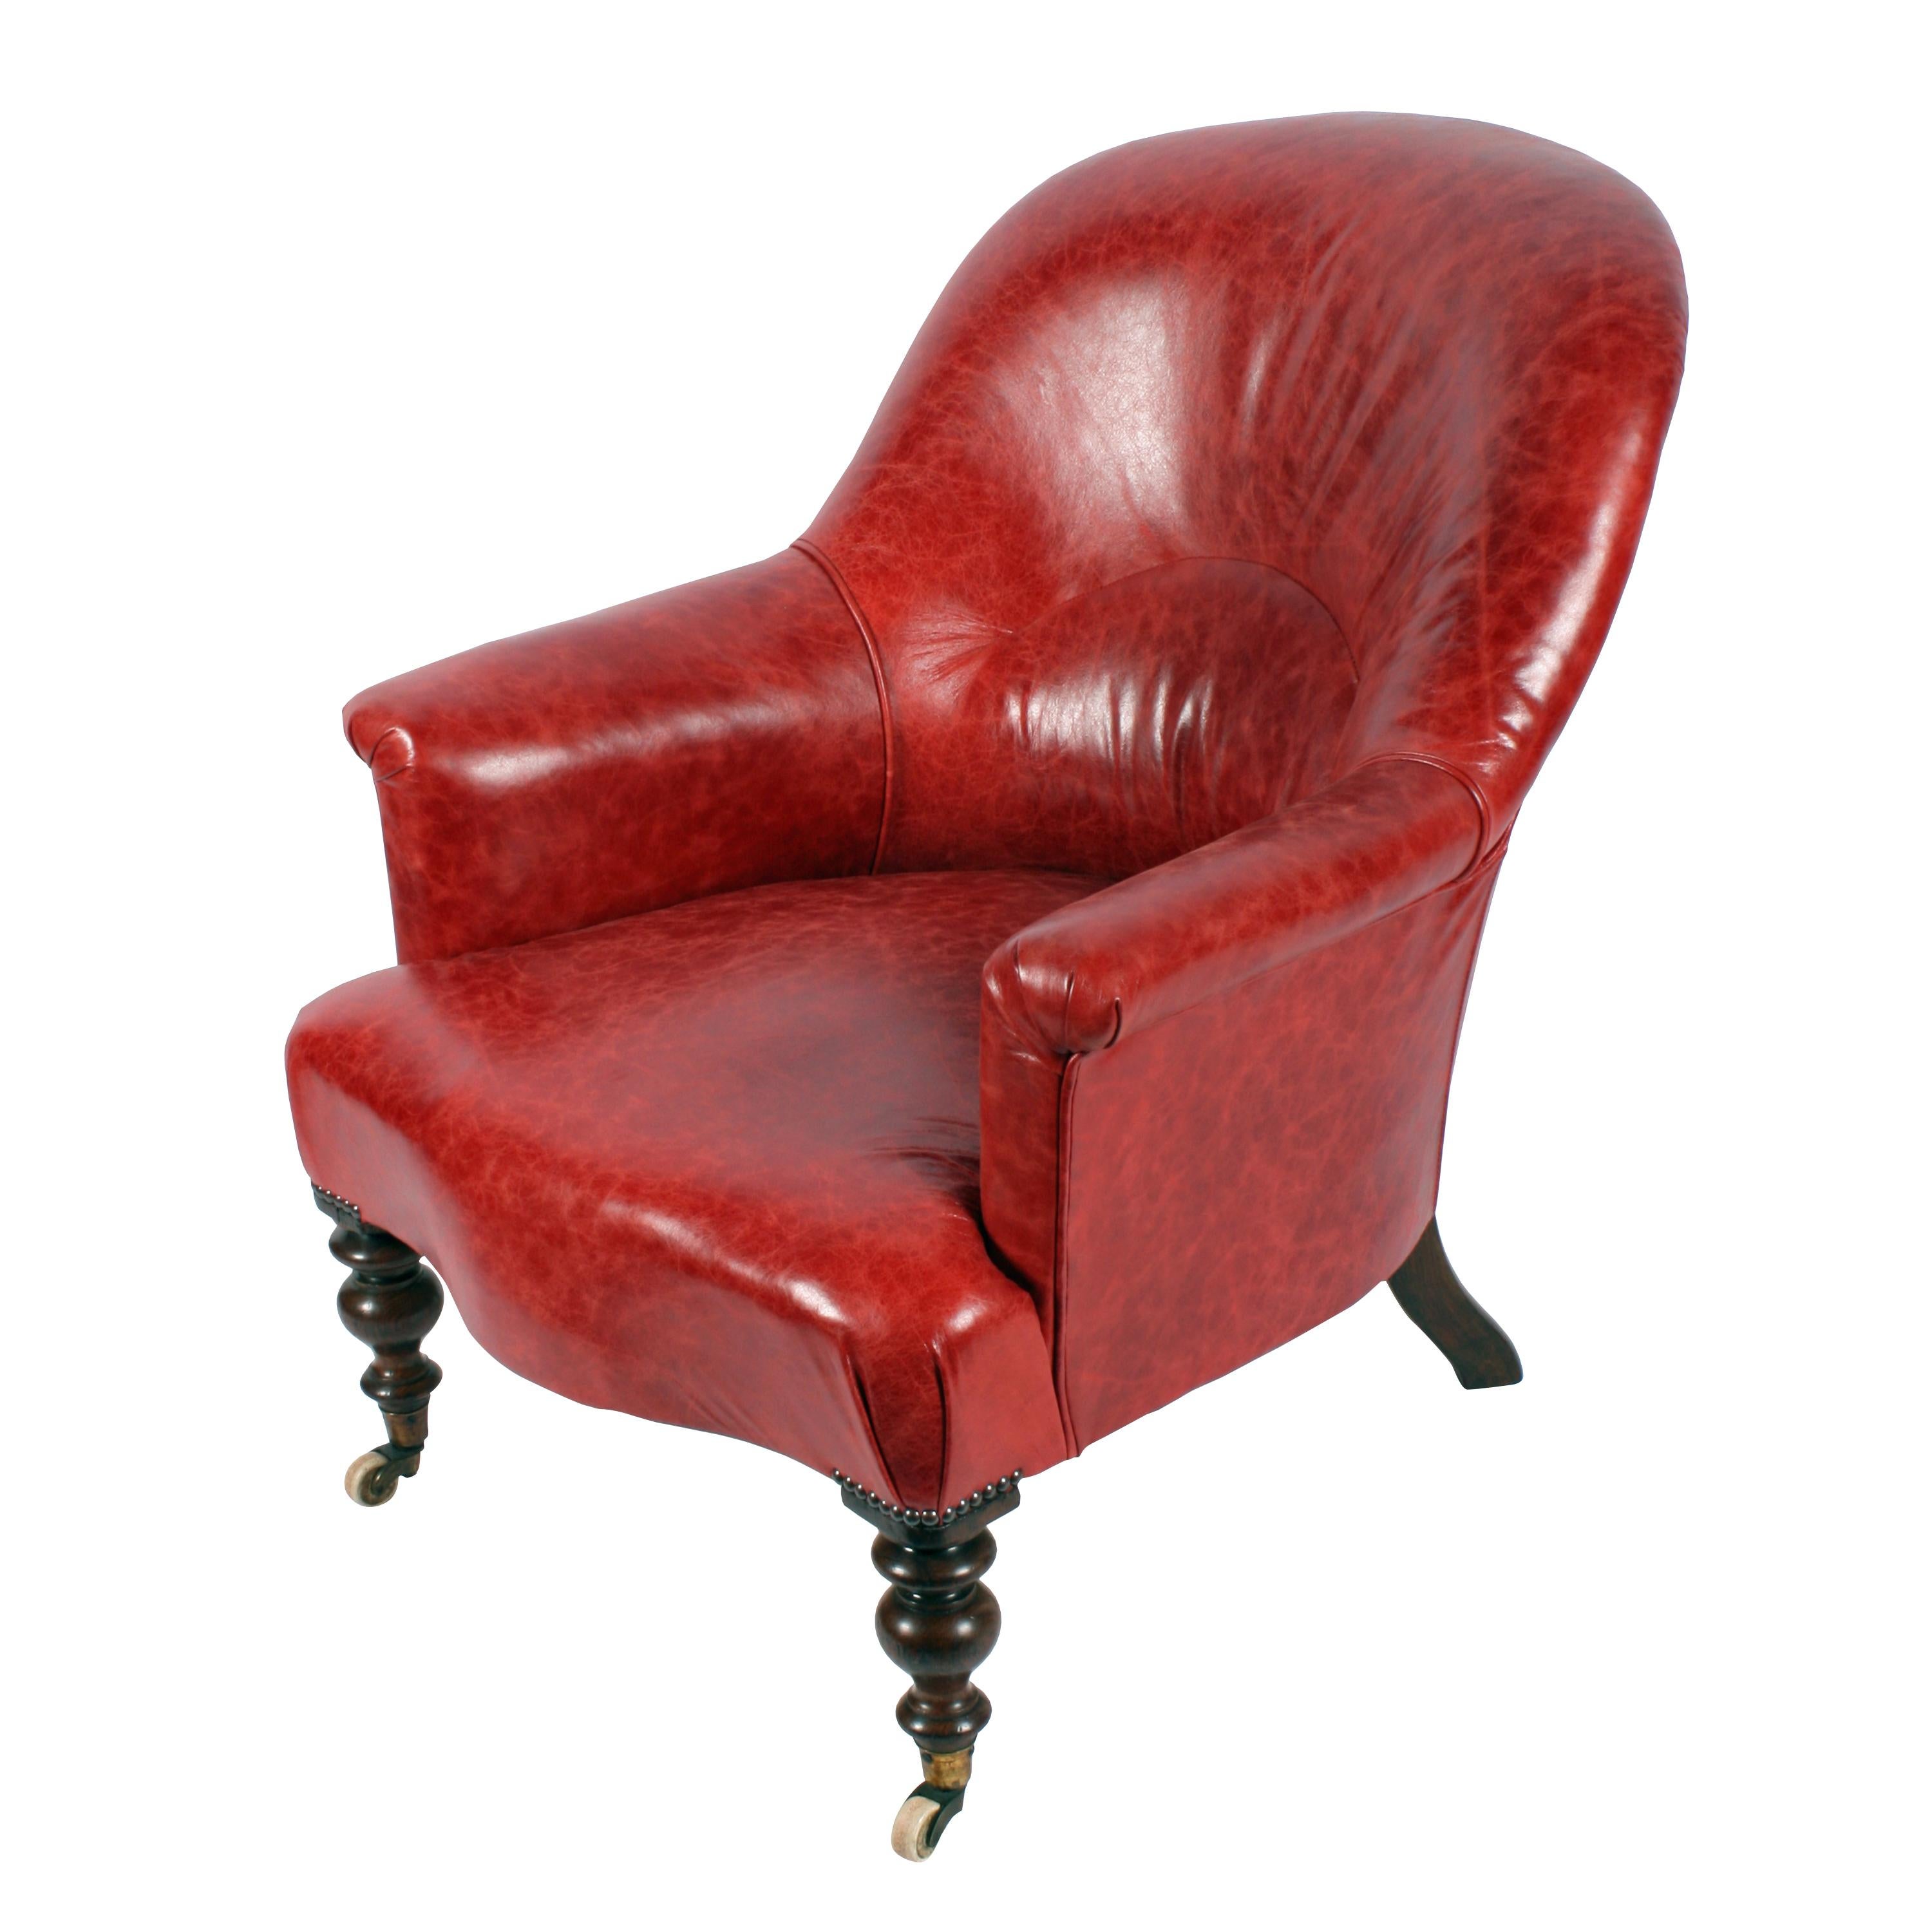 Victorian leather library armchair

Middle of the 19th century library armchair with rosewood legs and red leather hide upholstery.


The chair has turned front legs and square kick out back legs with cope and colinson patent gilt brass and